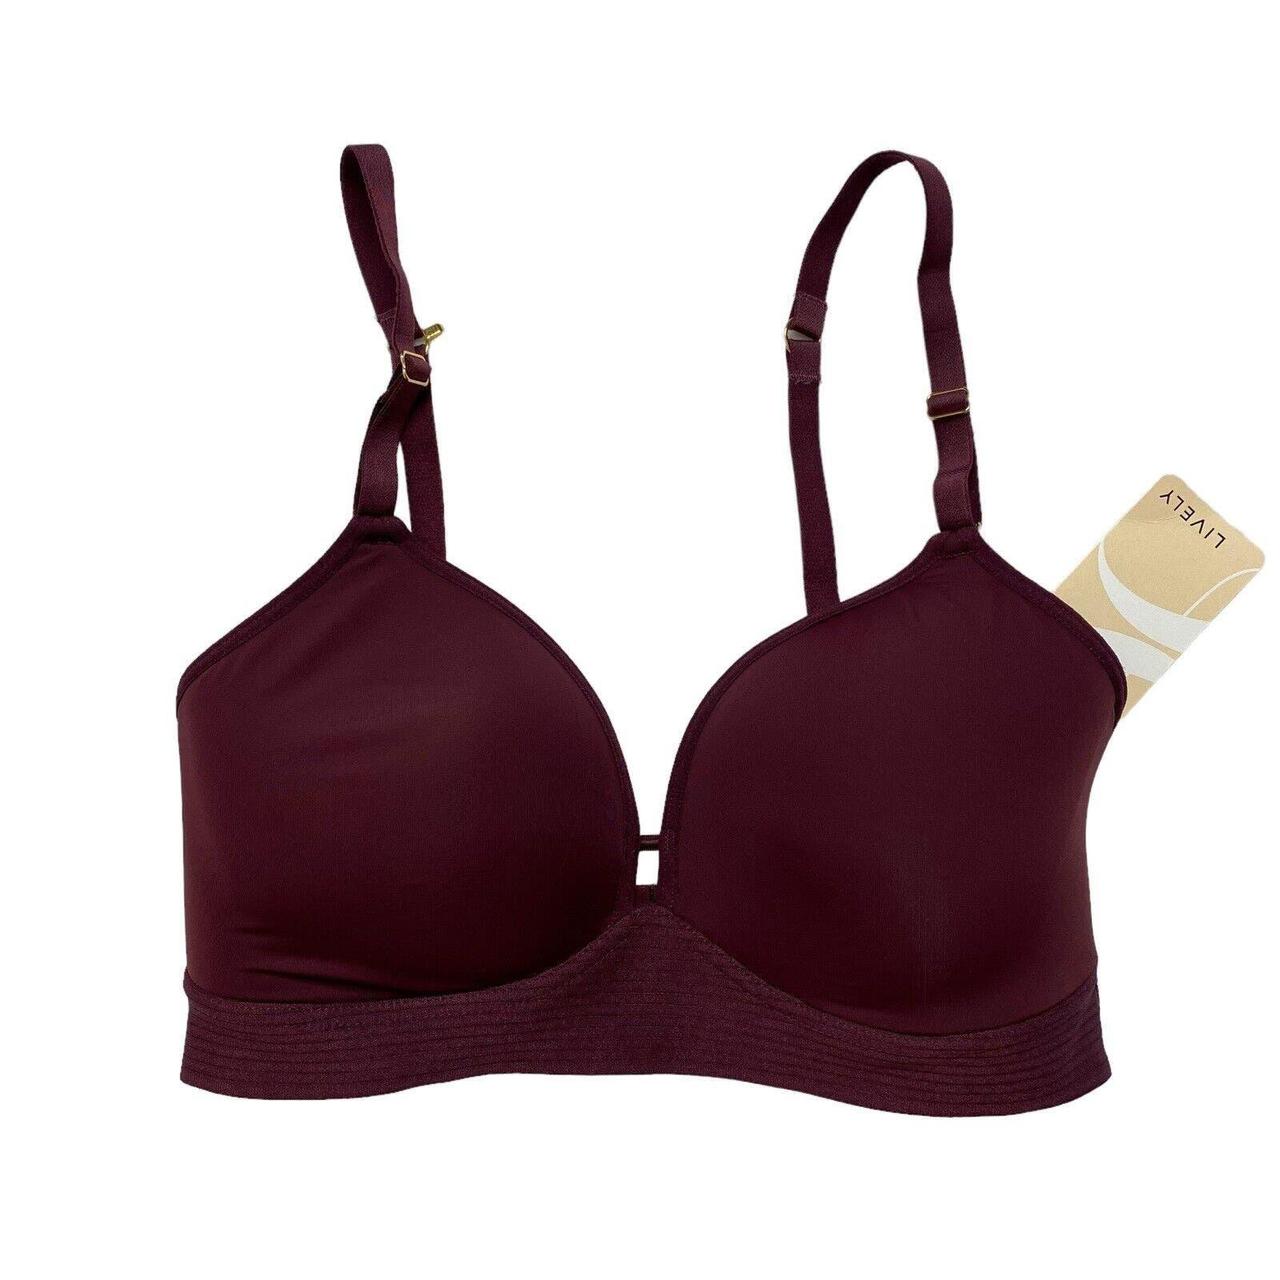 LIVELY New-with-tags The Spacer Bra in Plum. Size - Depop